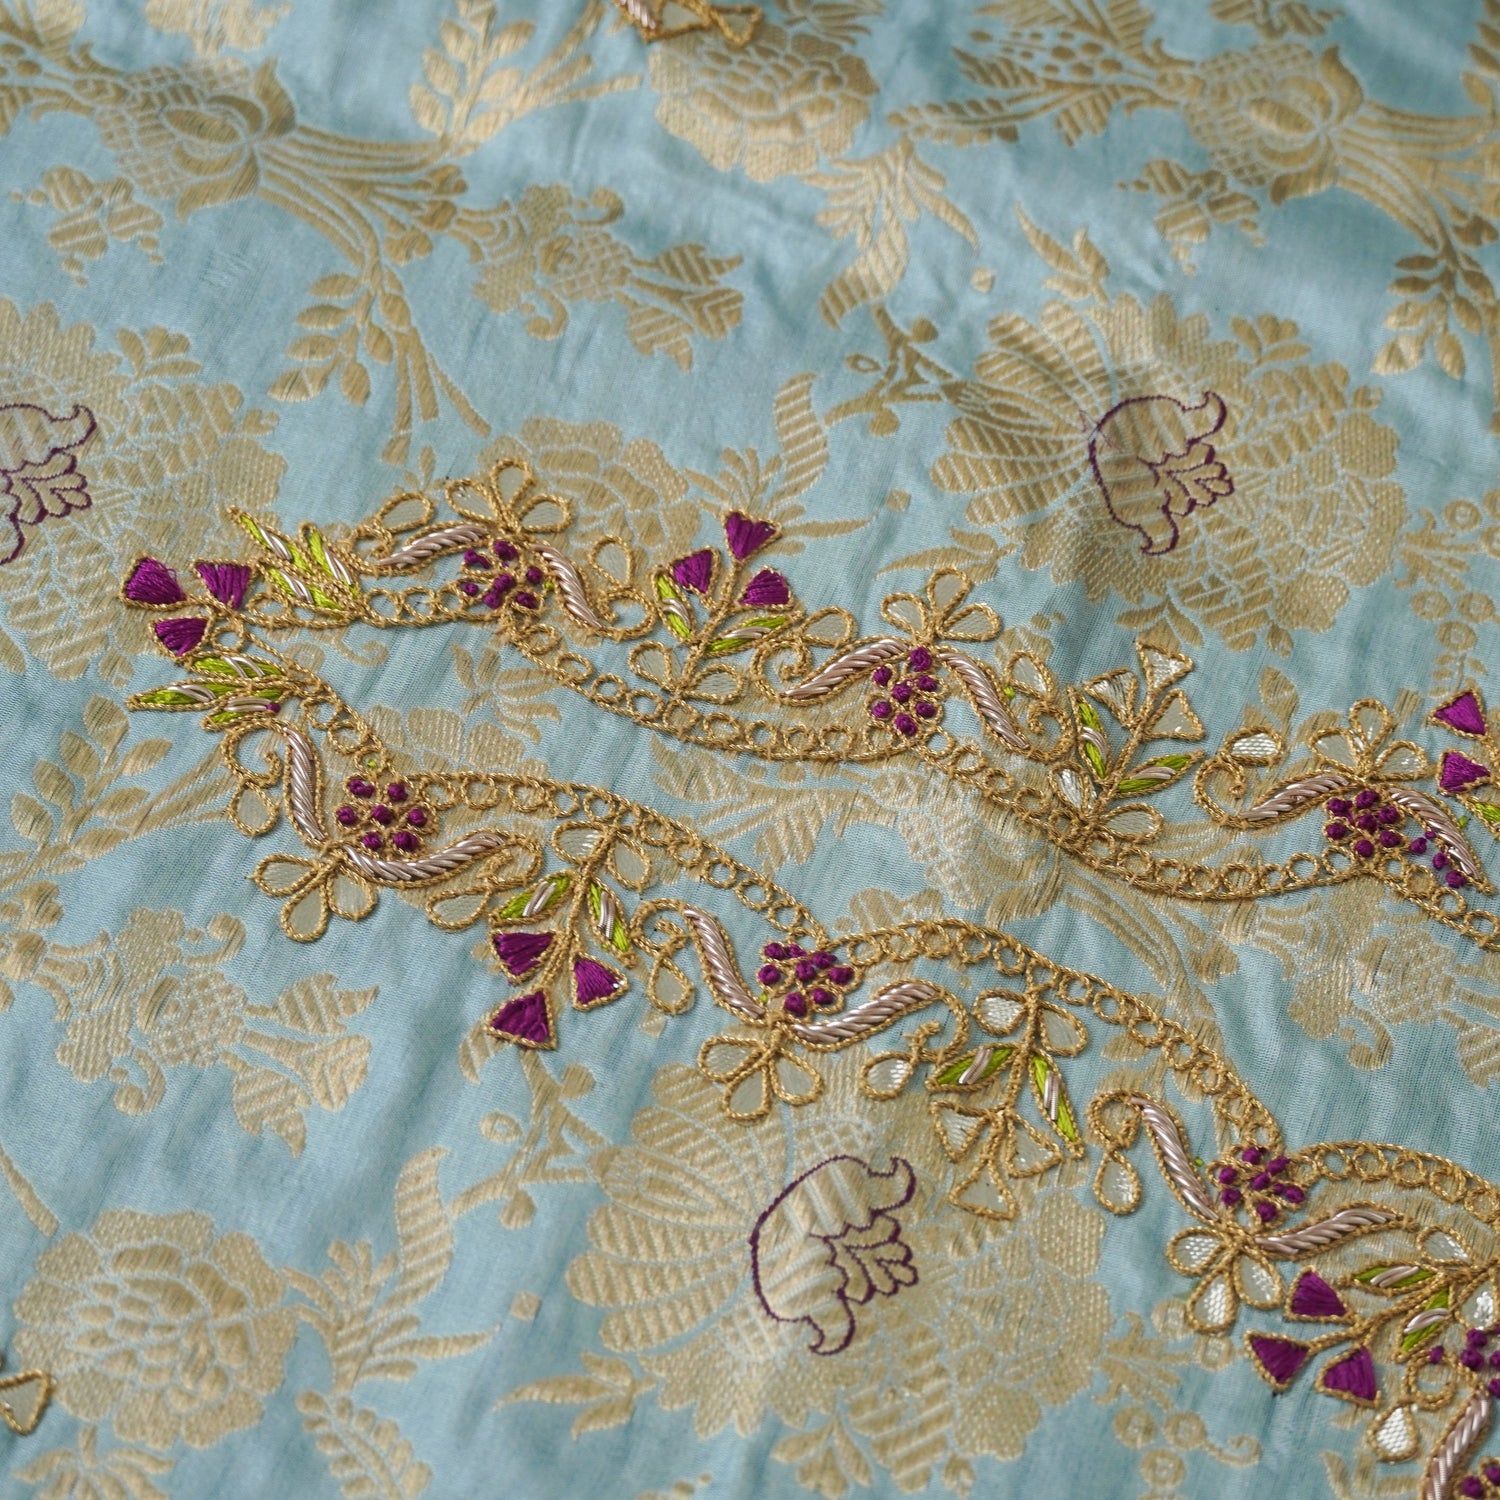 The Continuing Journey of The Brocade Weave